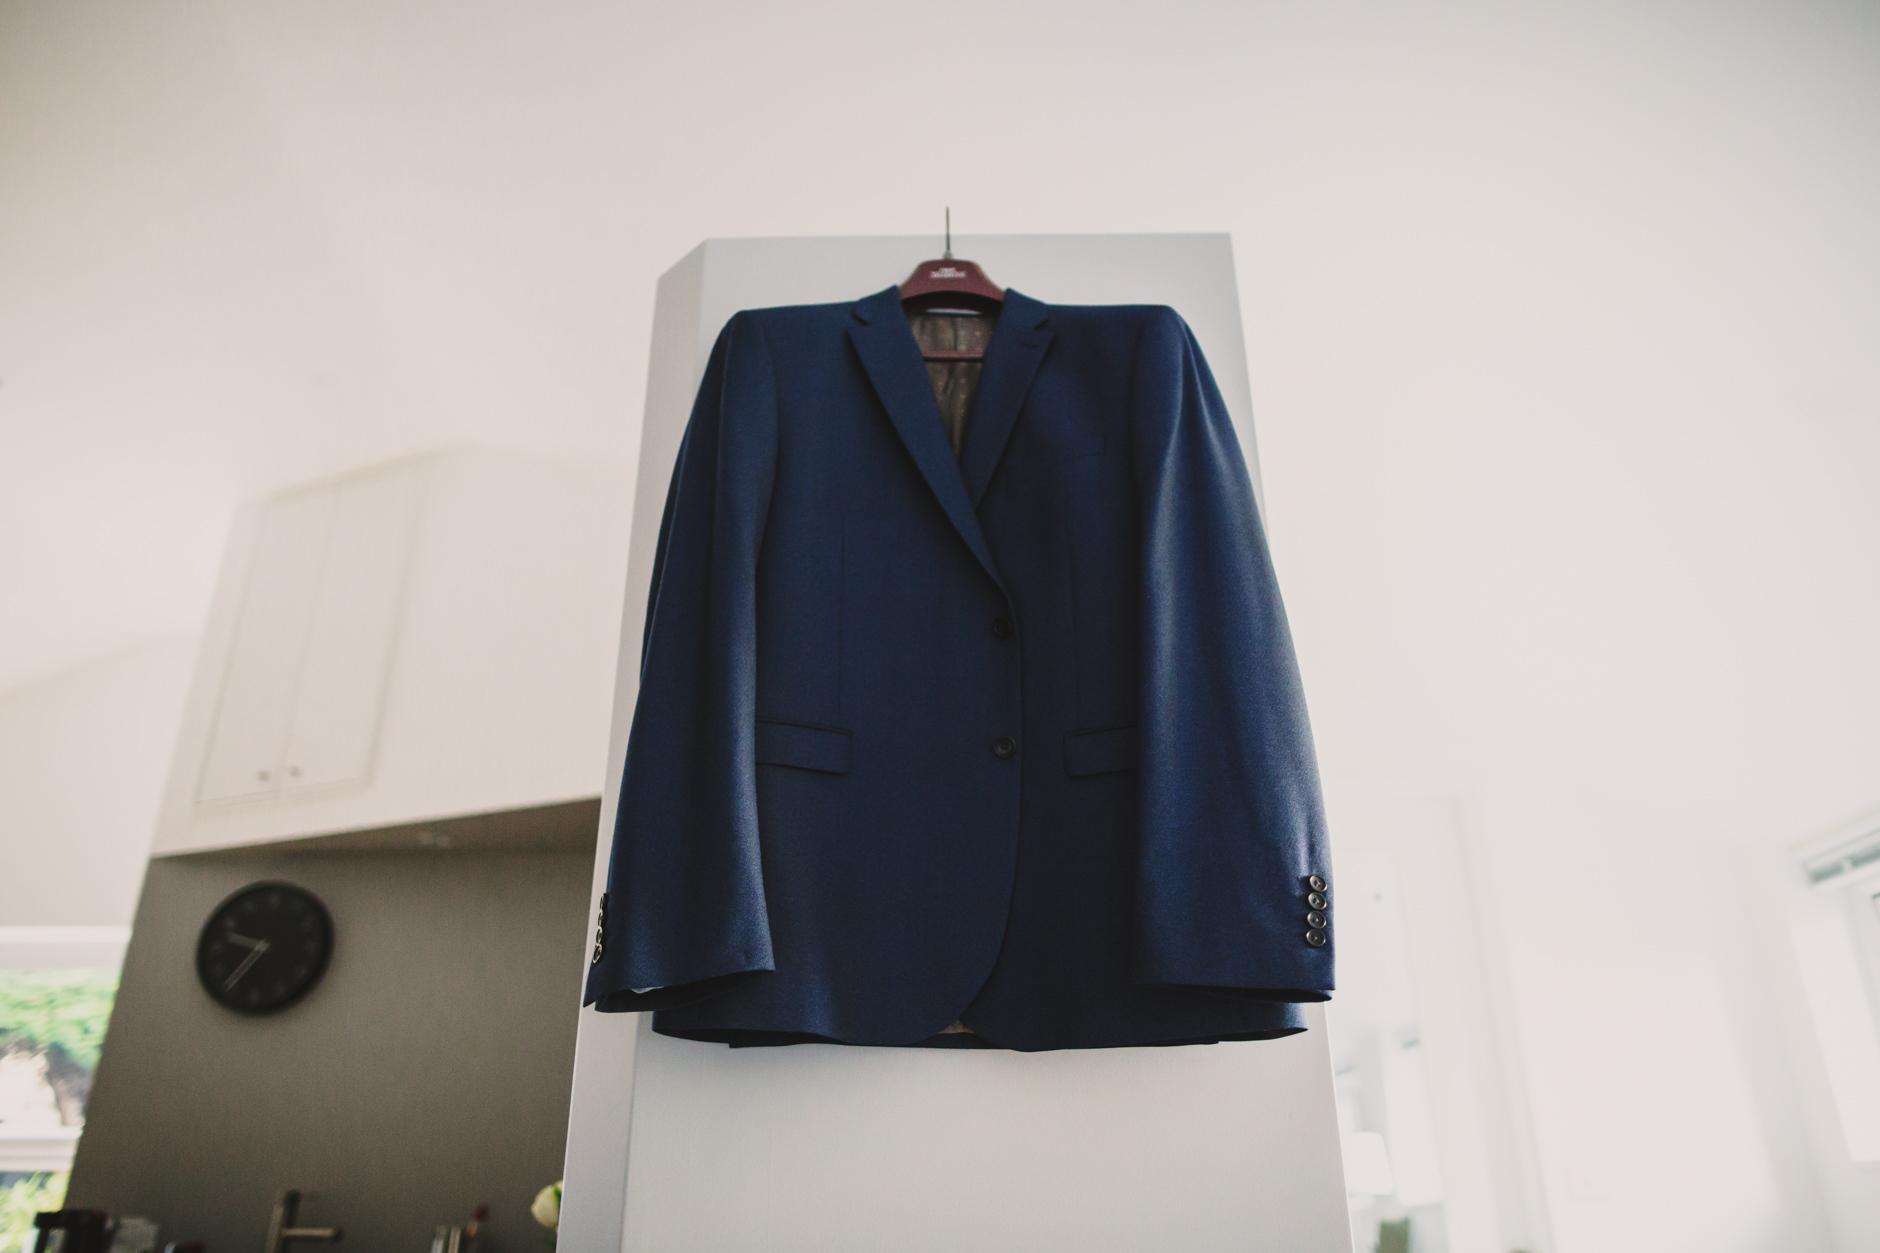 groom's suit hanging in ilkley air bnb apartment